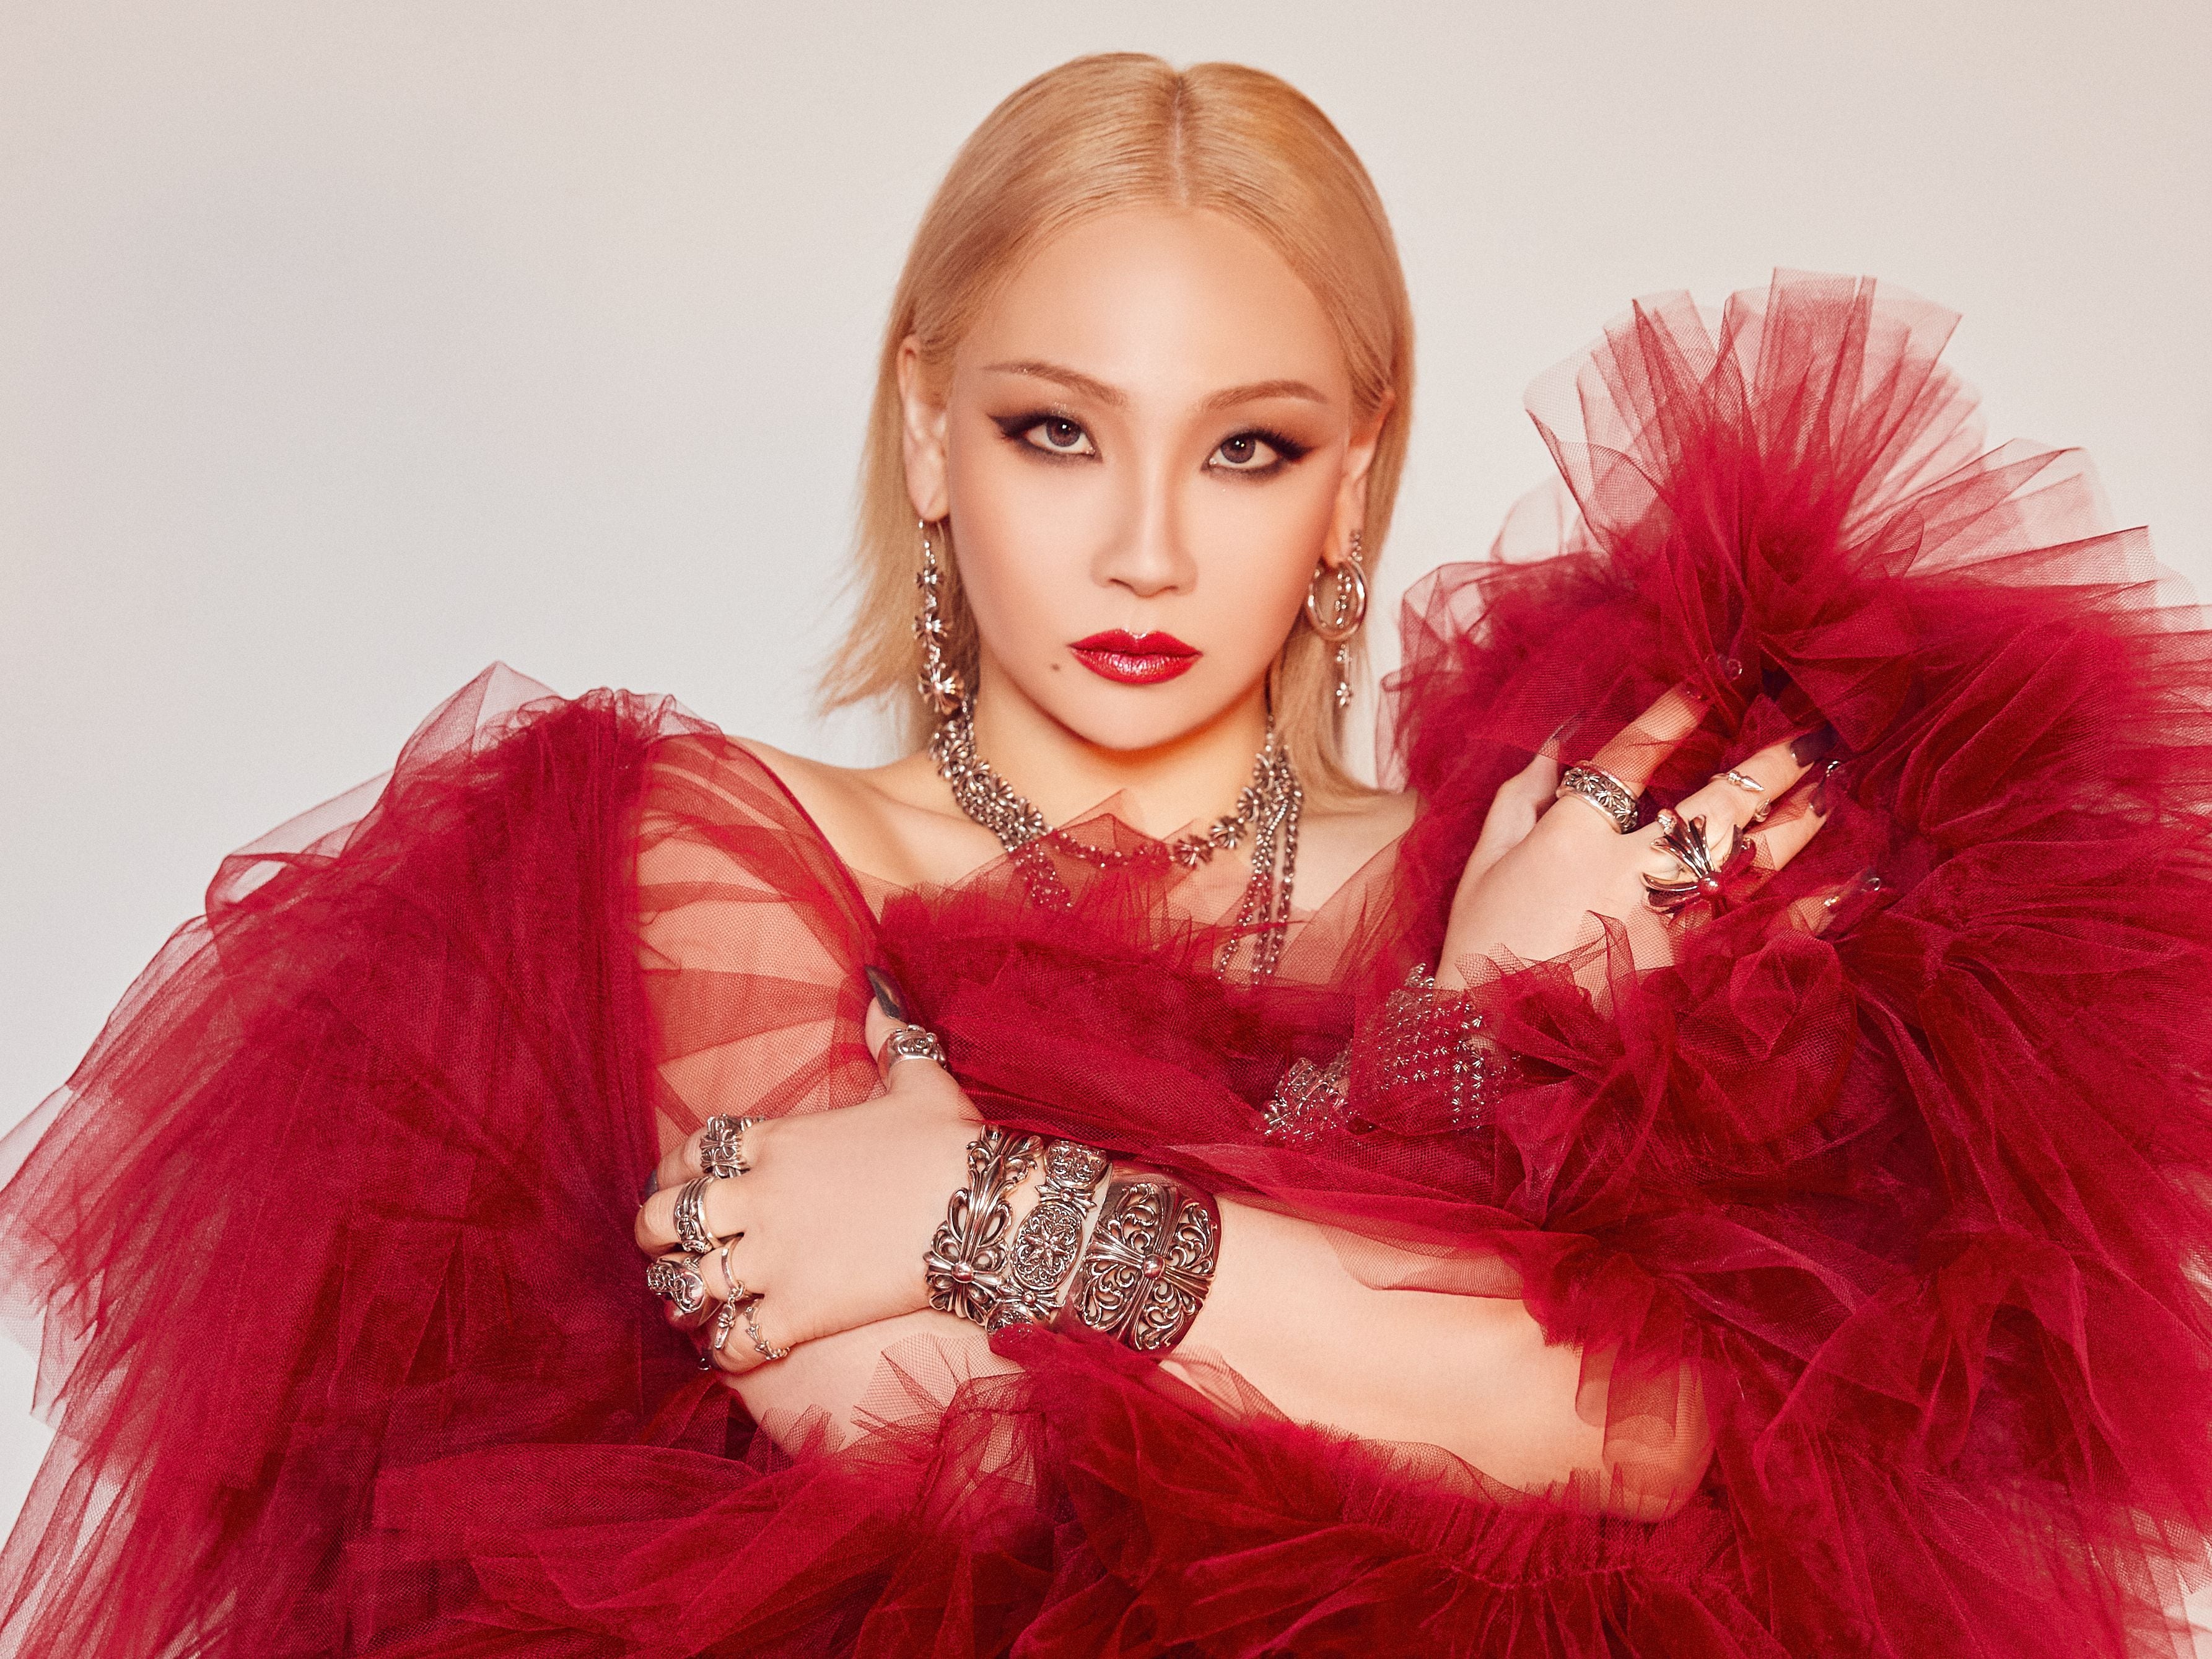 k-pop star cl to perform in dubai for inaugural waterbomb festival